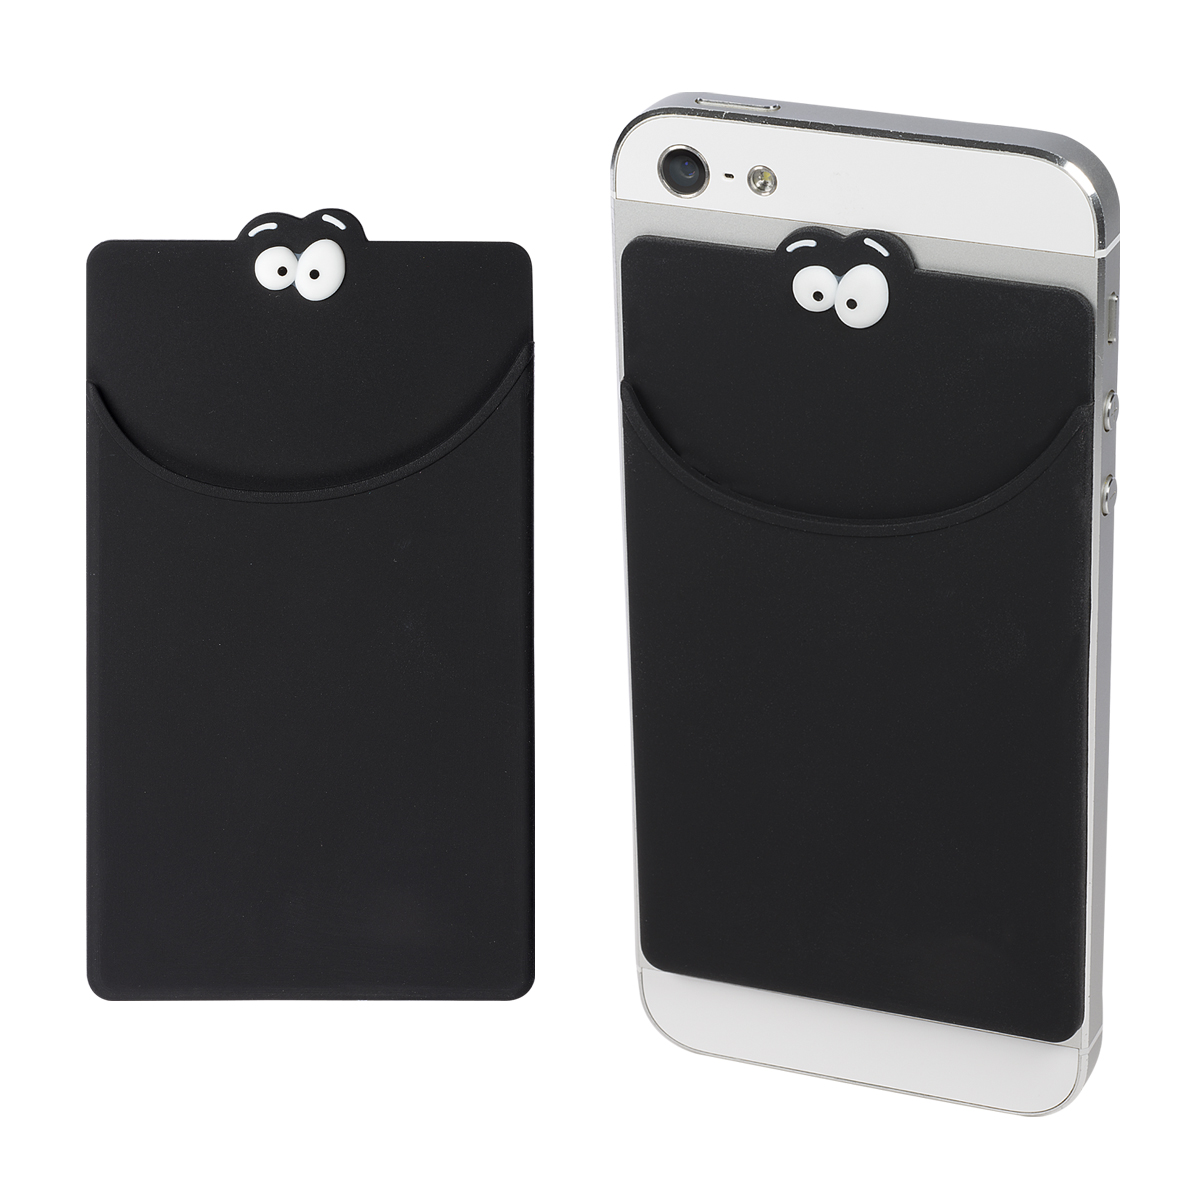 Goofy™ Silicone Mobile Device Pocket